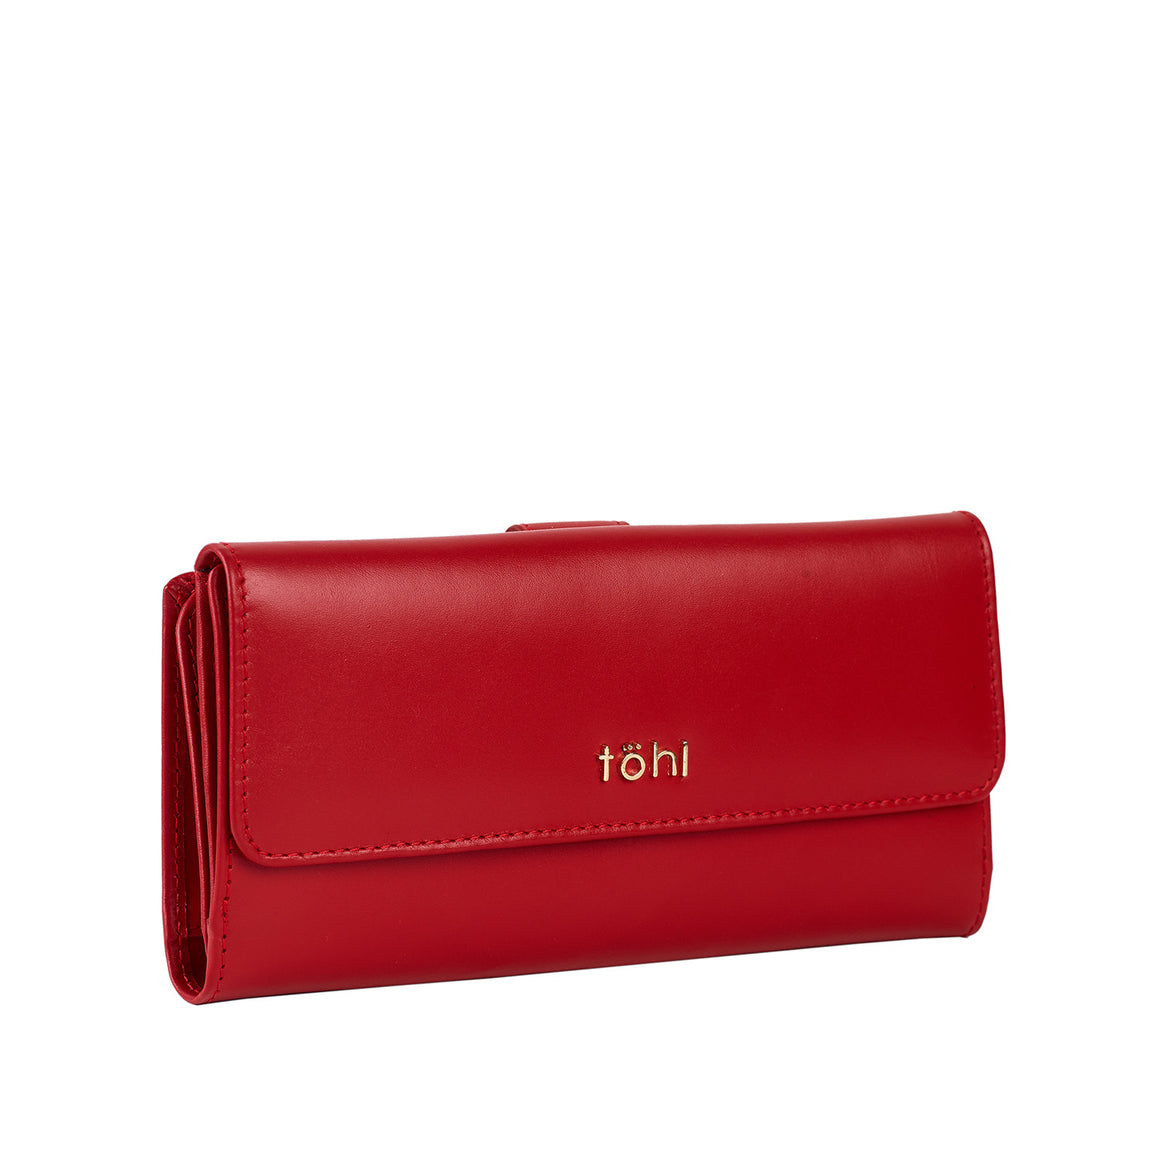 LUDLOW WOMEN'S FLAPOVER WALLET - SPICE RED